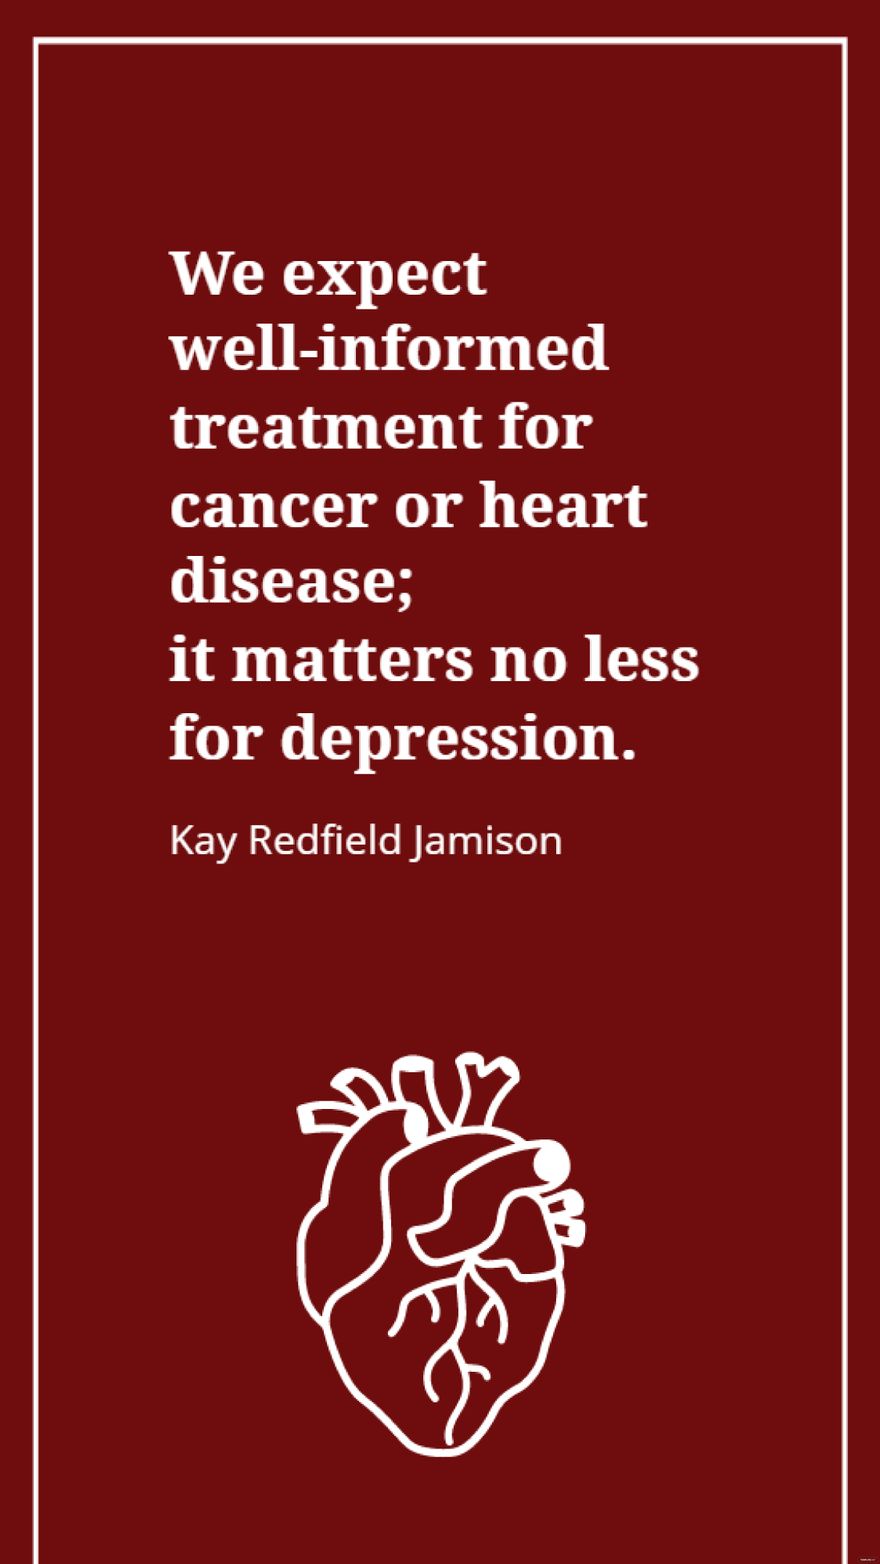 Kay Redfield Jamison - We expect well-informed treatment for cancer or heart disease; it matters no less for depression.